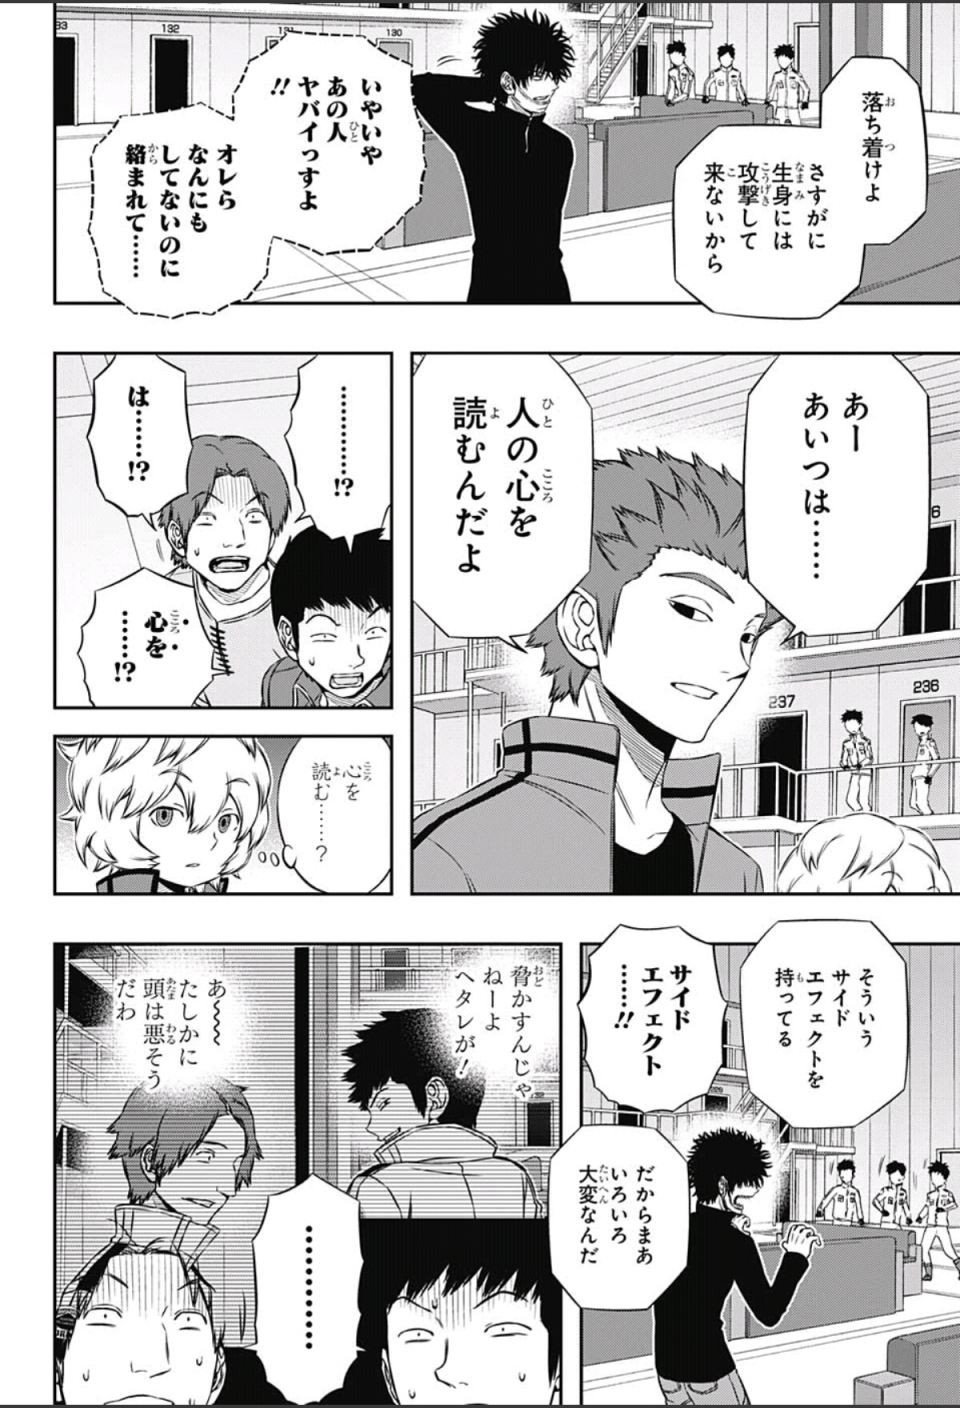 World Trigger - Chapter 109 - Page 2